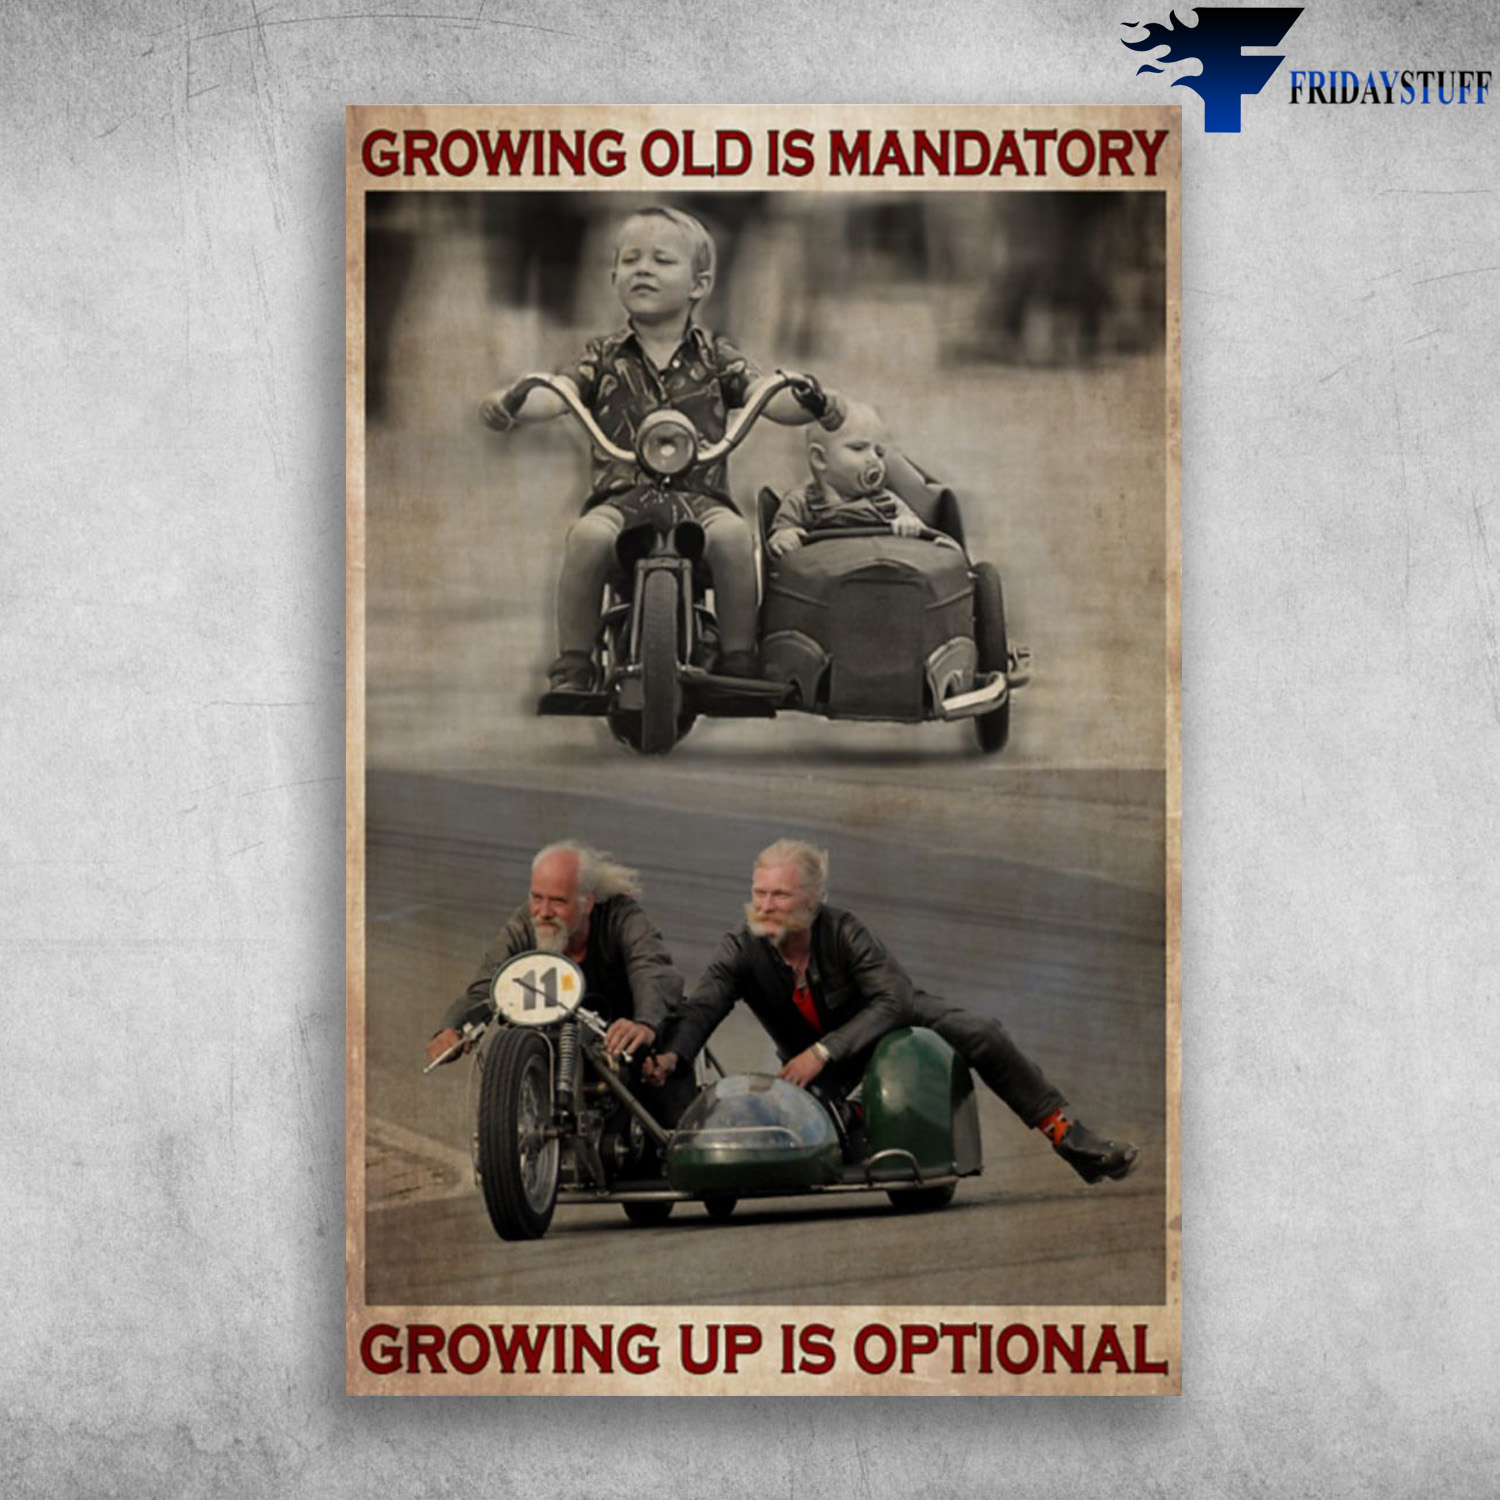 Two Old Man In Sidecar - Growing Old Mandatory And Ground Up Is Optional